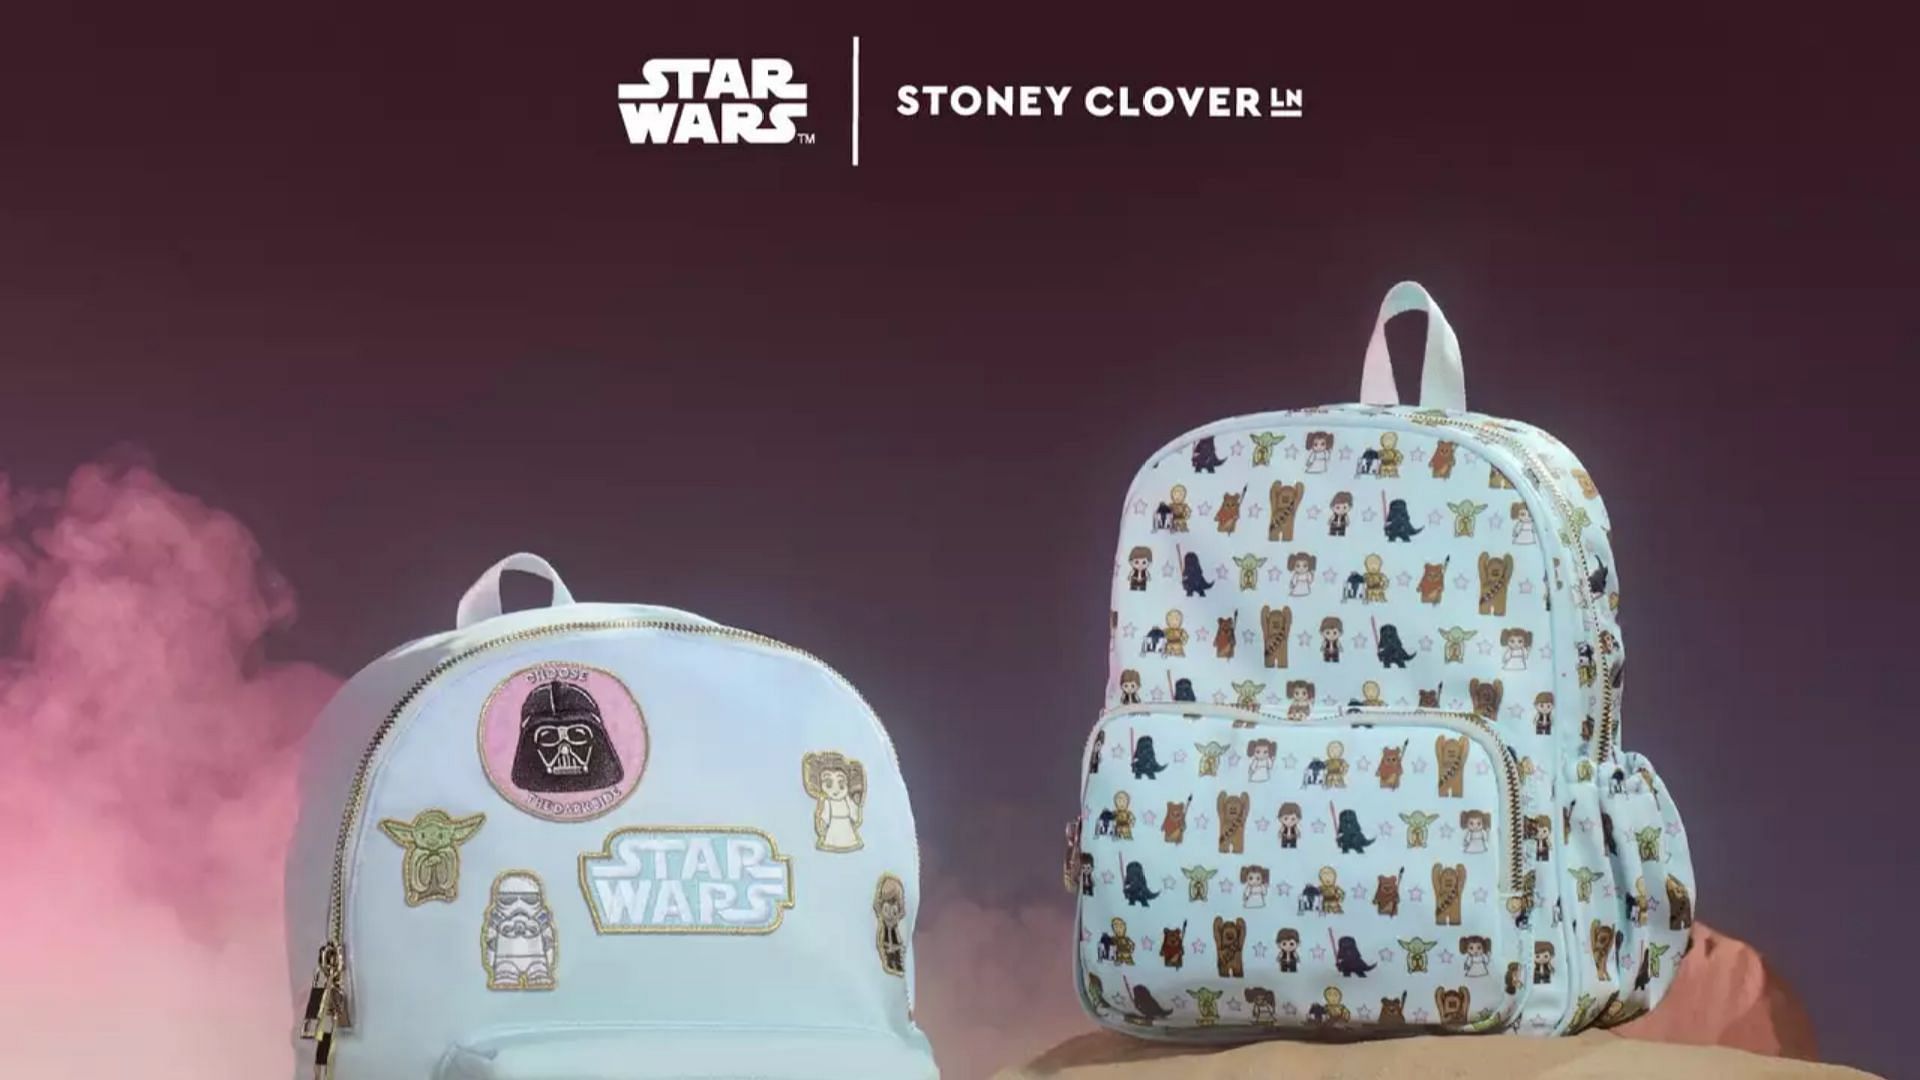 Stoney Clover Lane Star Wars Patched Mini Tote Bag NWT The Force $298